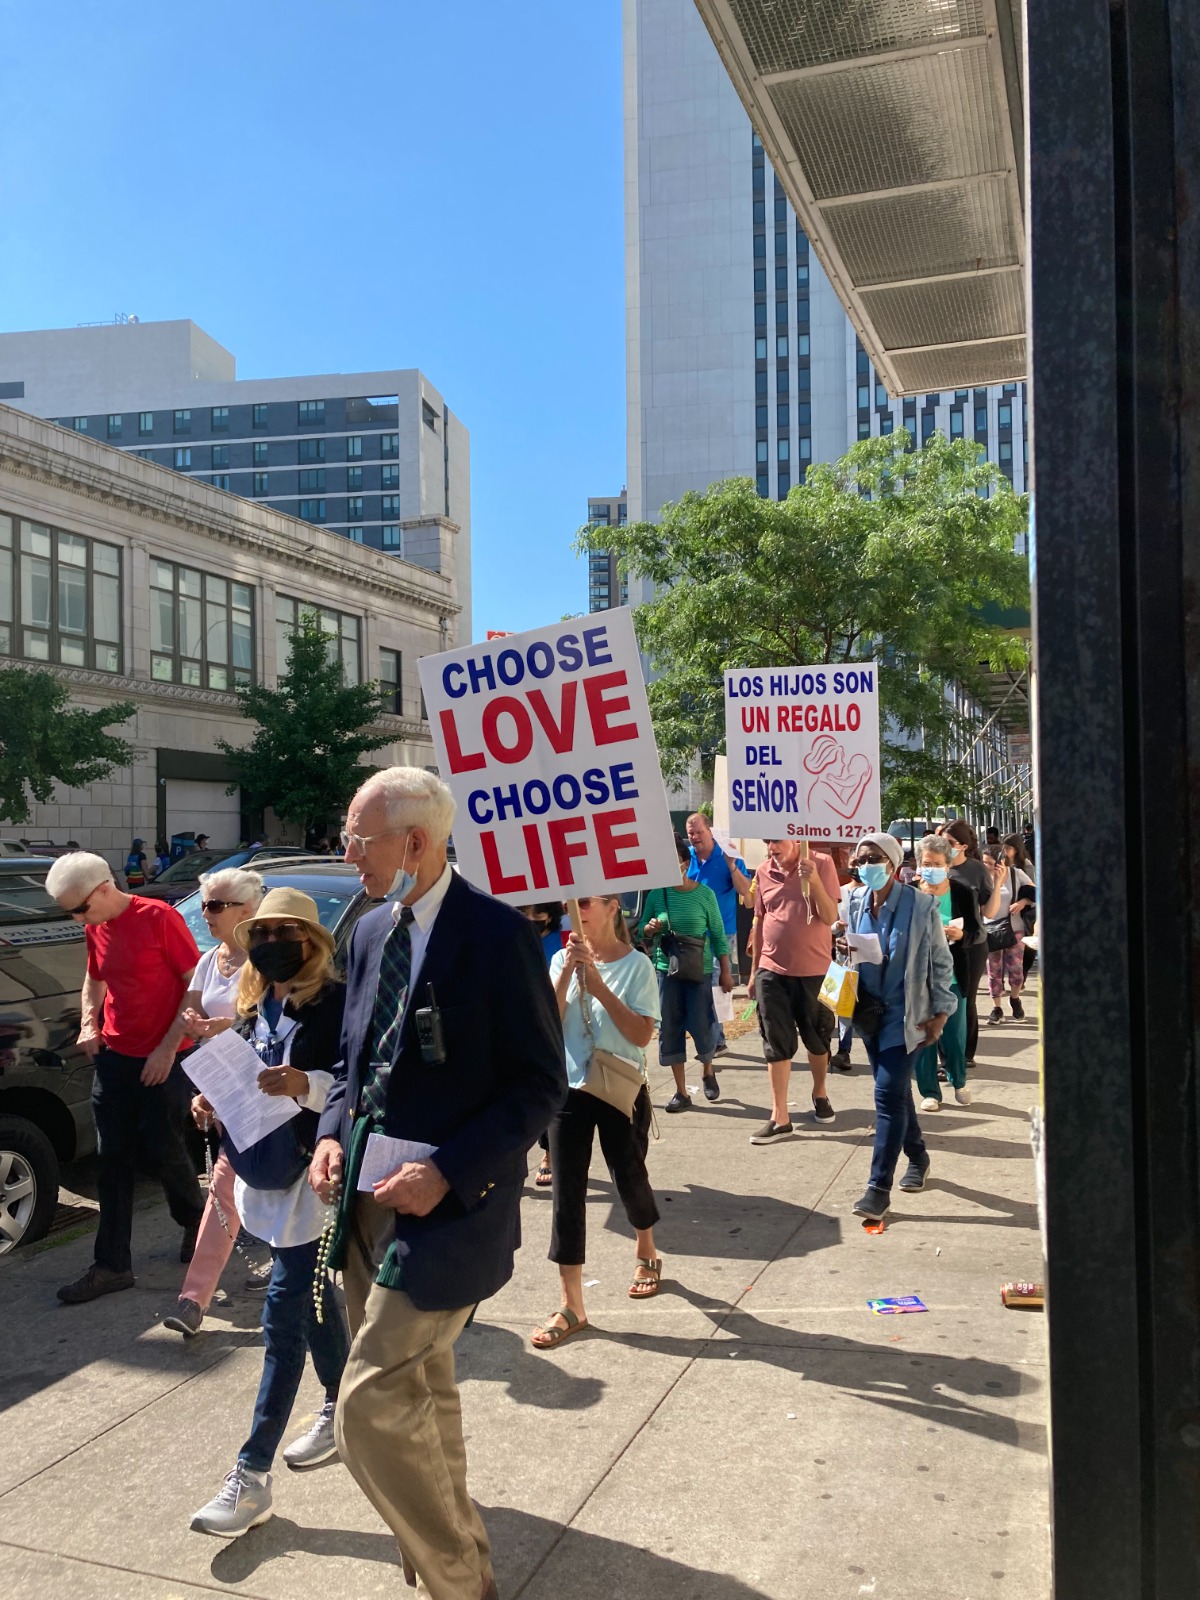 A man holding a sign that says " choose love, choose life ".